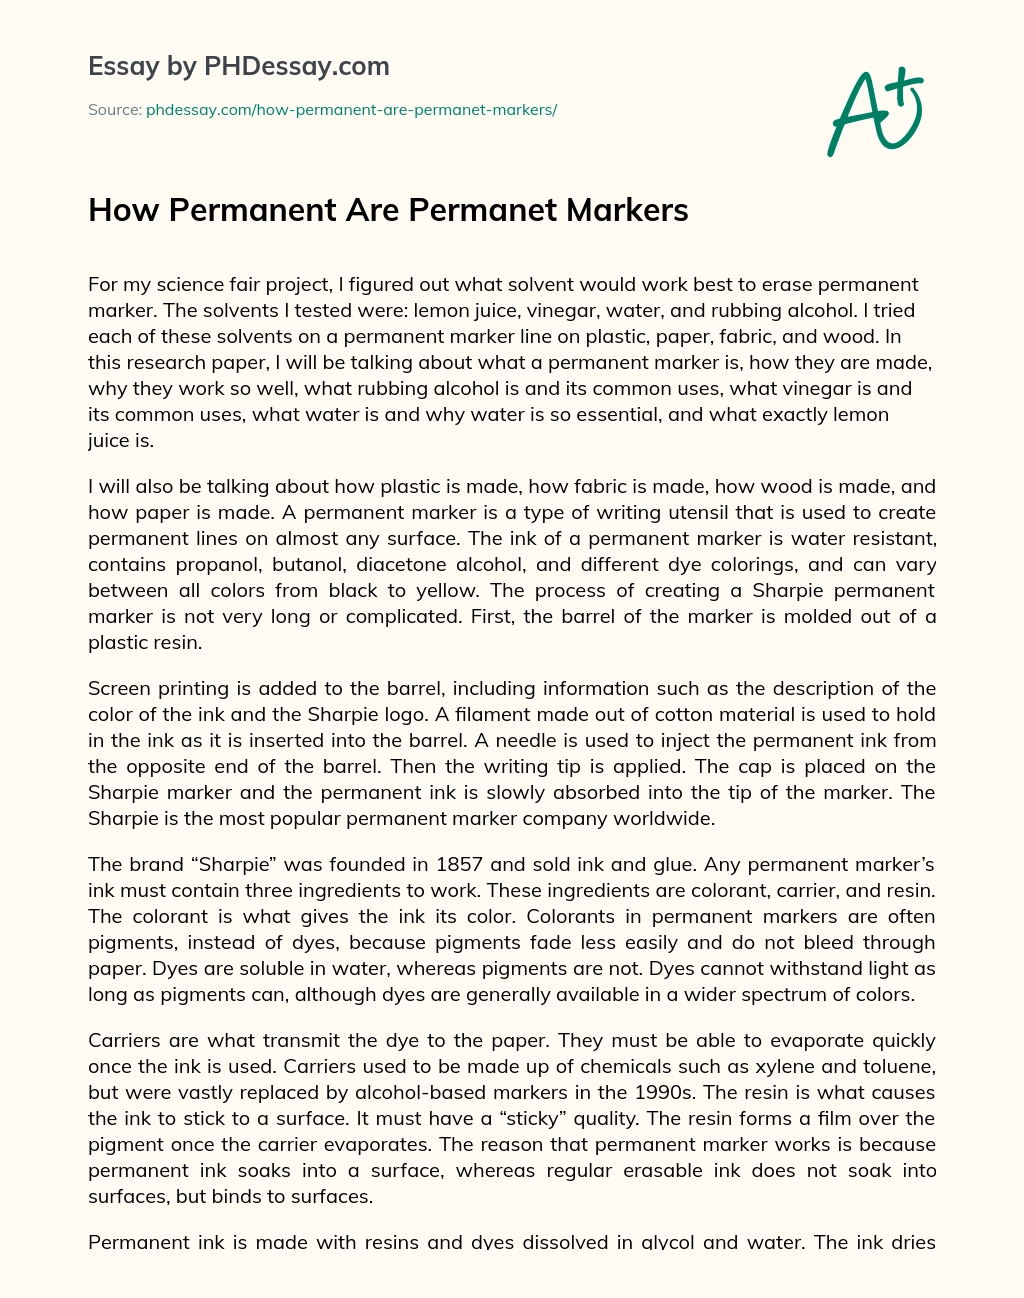 How Permanent Are Permanet Markers essay